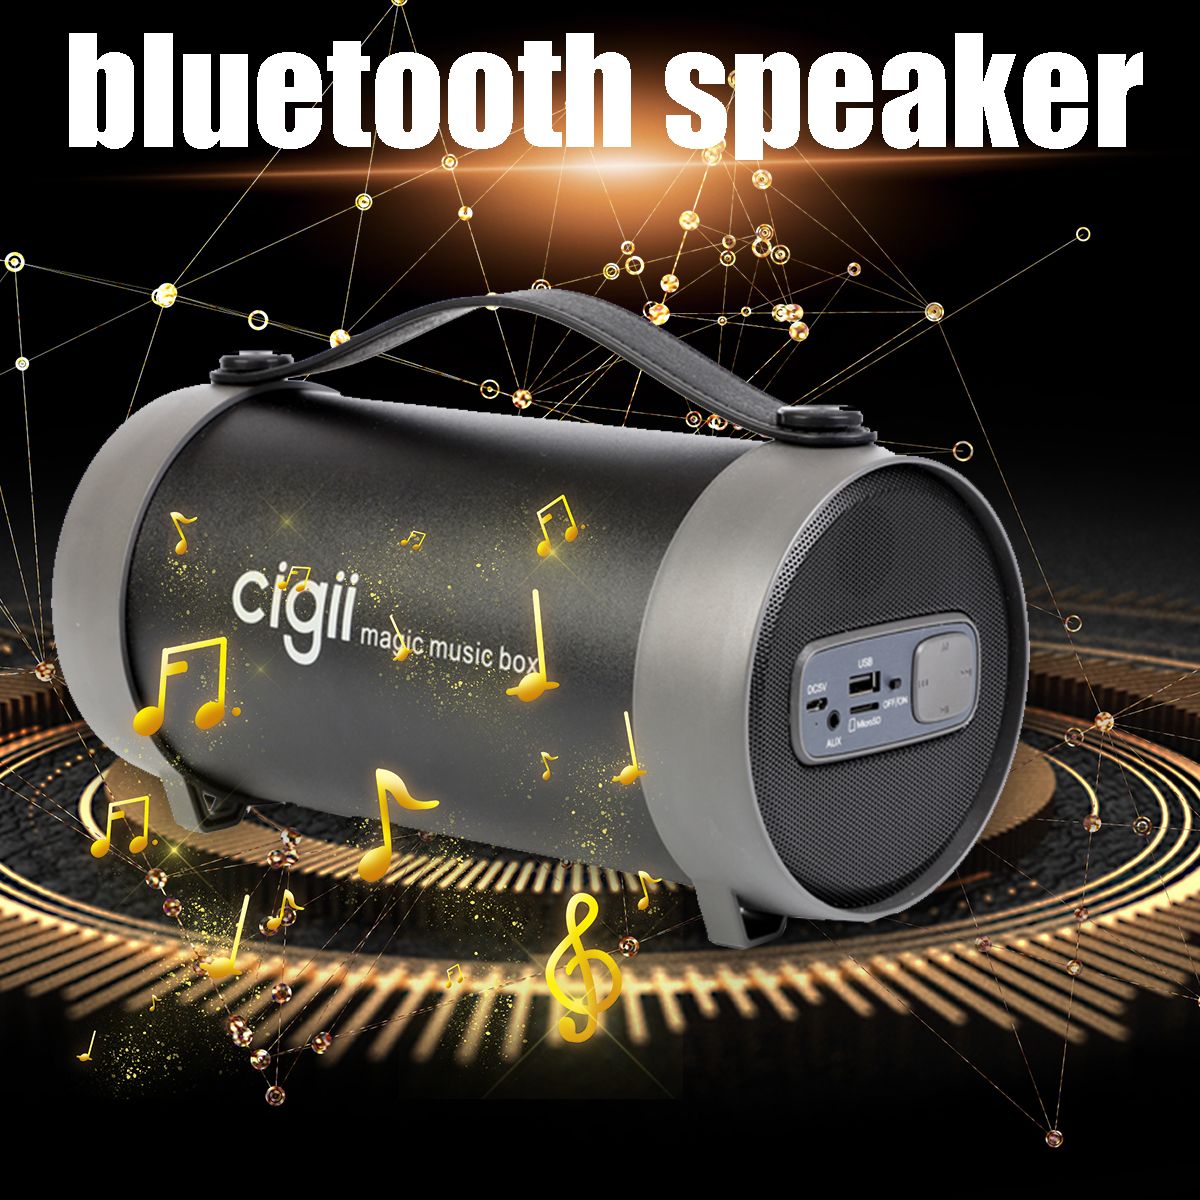 CIGII-S22E-1500mAh-35mm-Wireless-Portable-bluetooth-Speaker-Subwoofer-Noise-Cancelling-with-Echo-Con-1567053